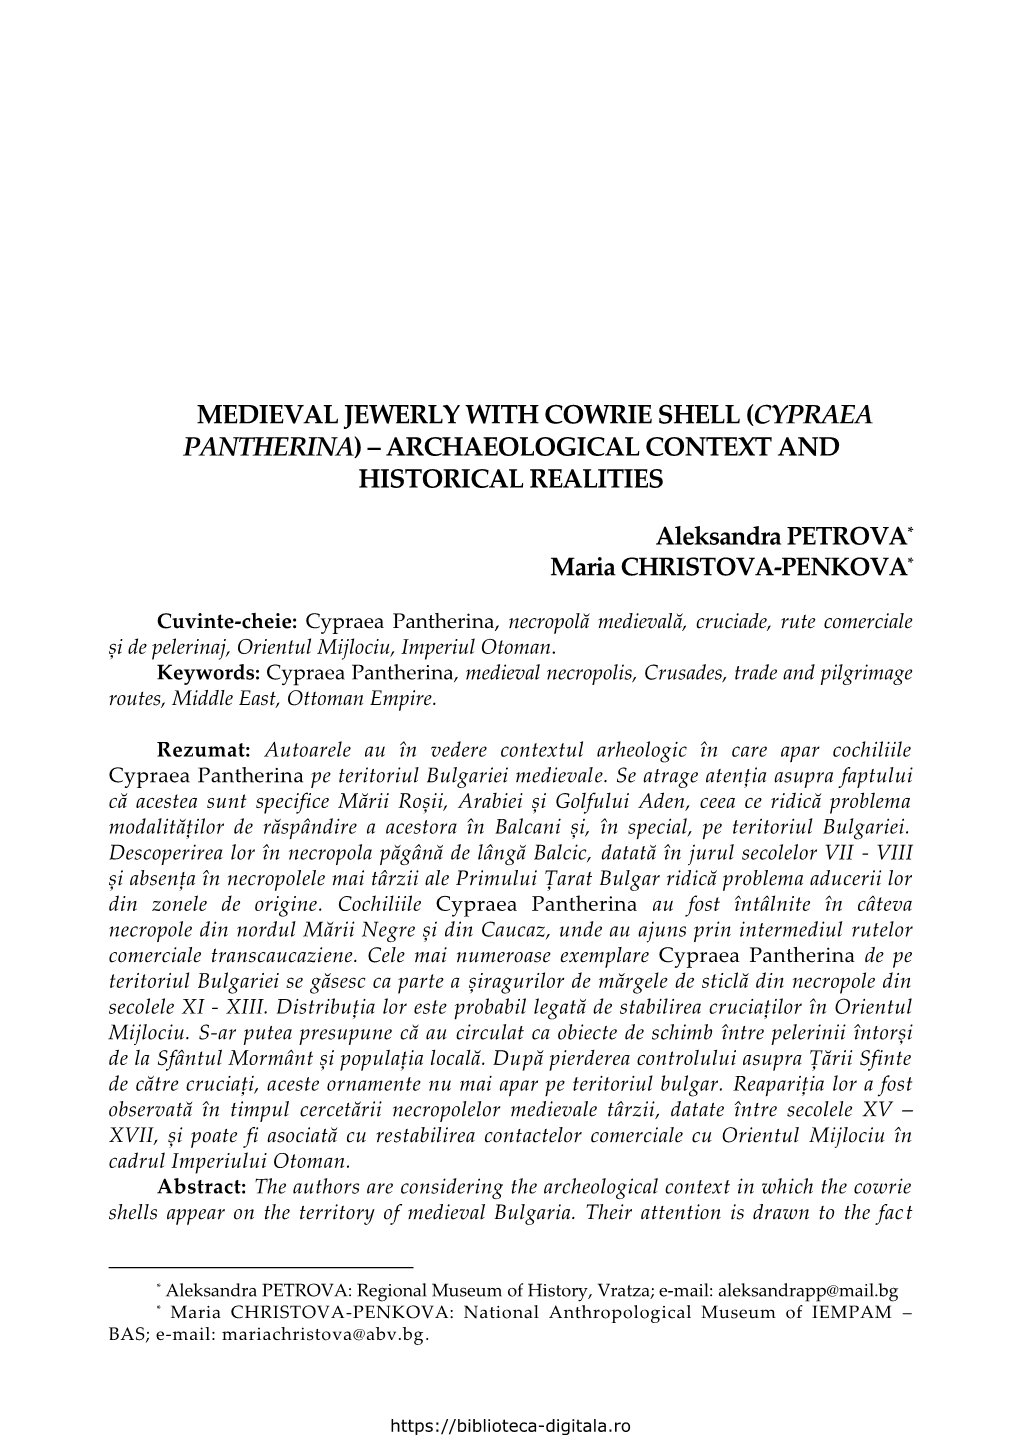 Medieval Jewerly with Cowrie Shell (Cypraea Pantherina) – Archaeological Context and Historical Realities